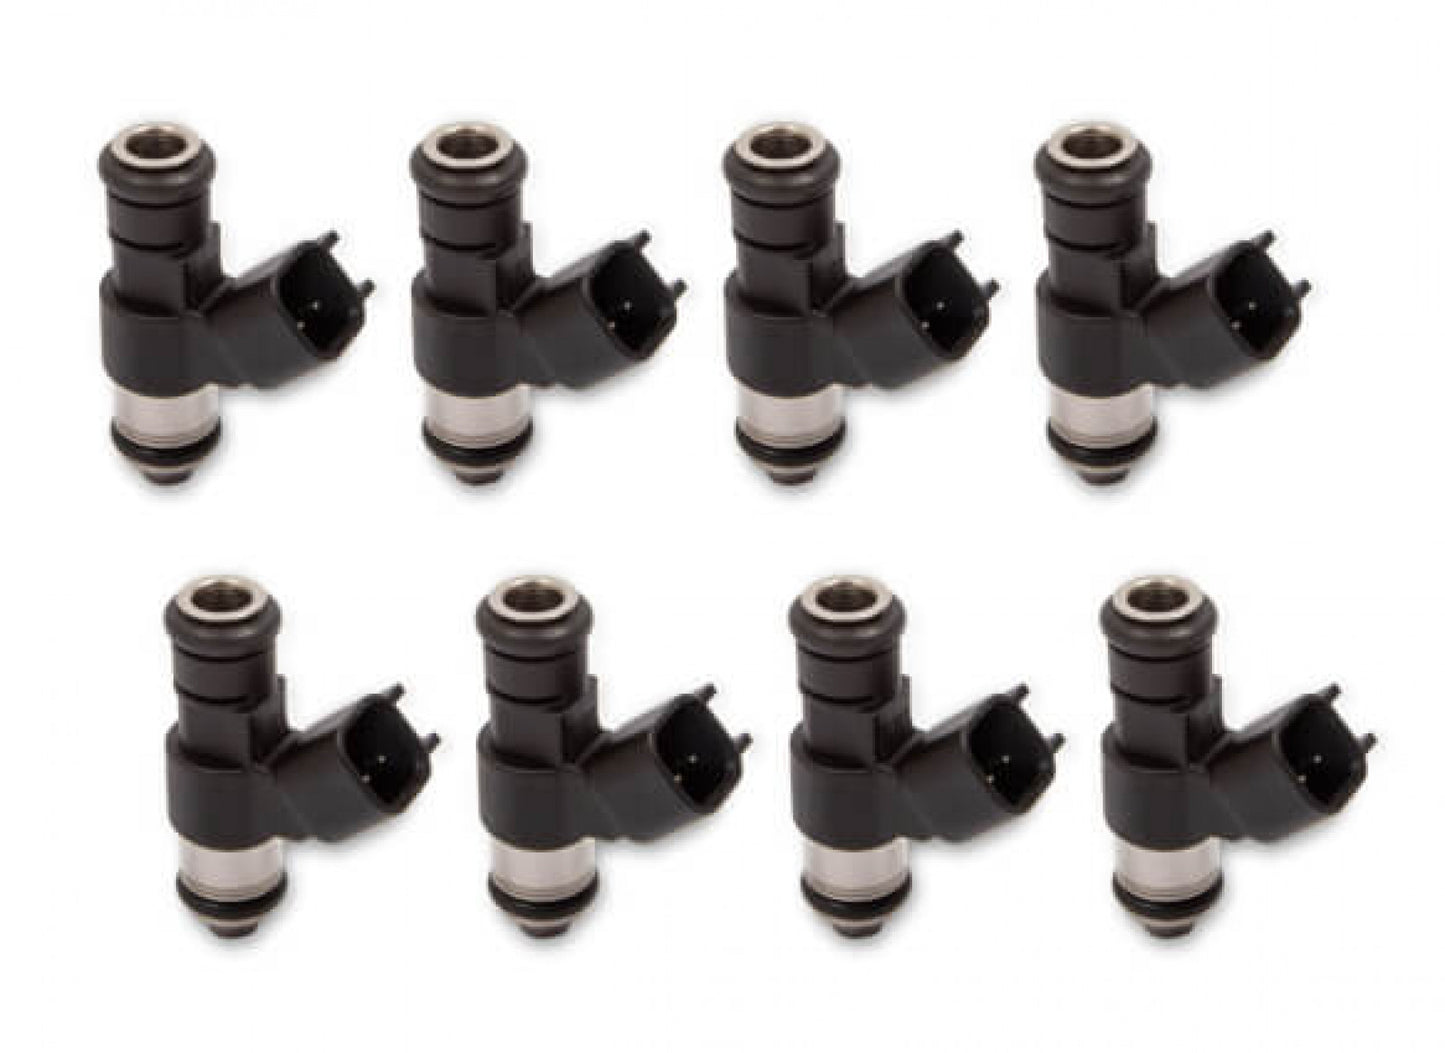 Holley EFI Performance Fuel Injectors - Set of Eight 3522-768X